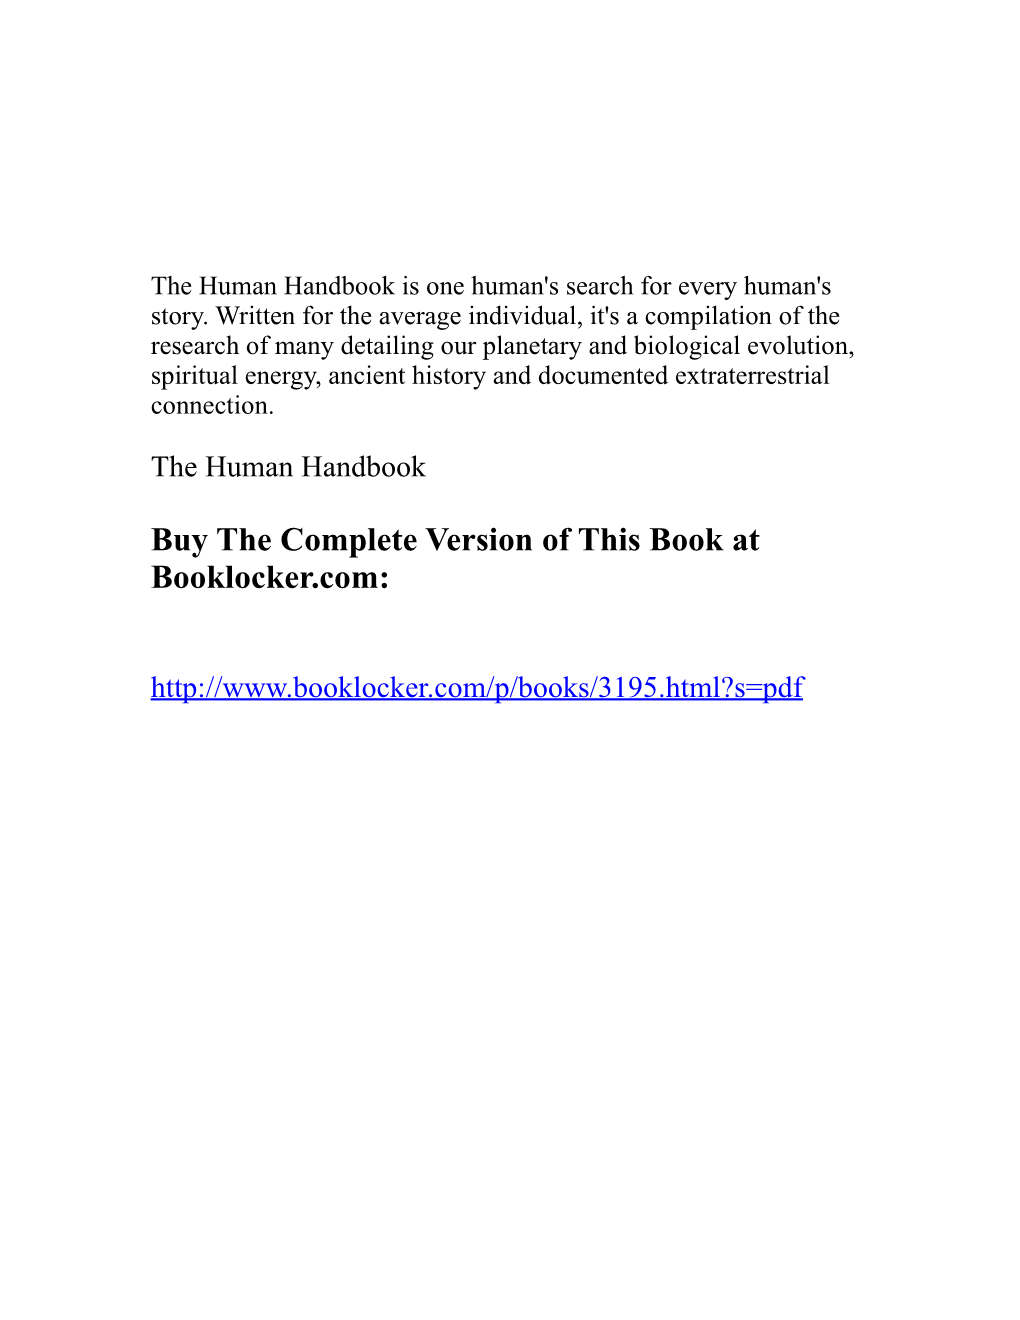 The Human Handbook Is One Human's Search for Every Human's Story